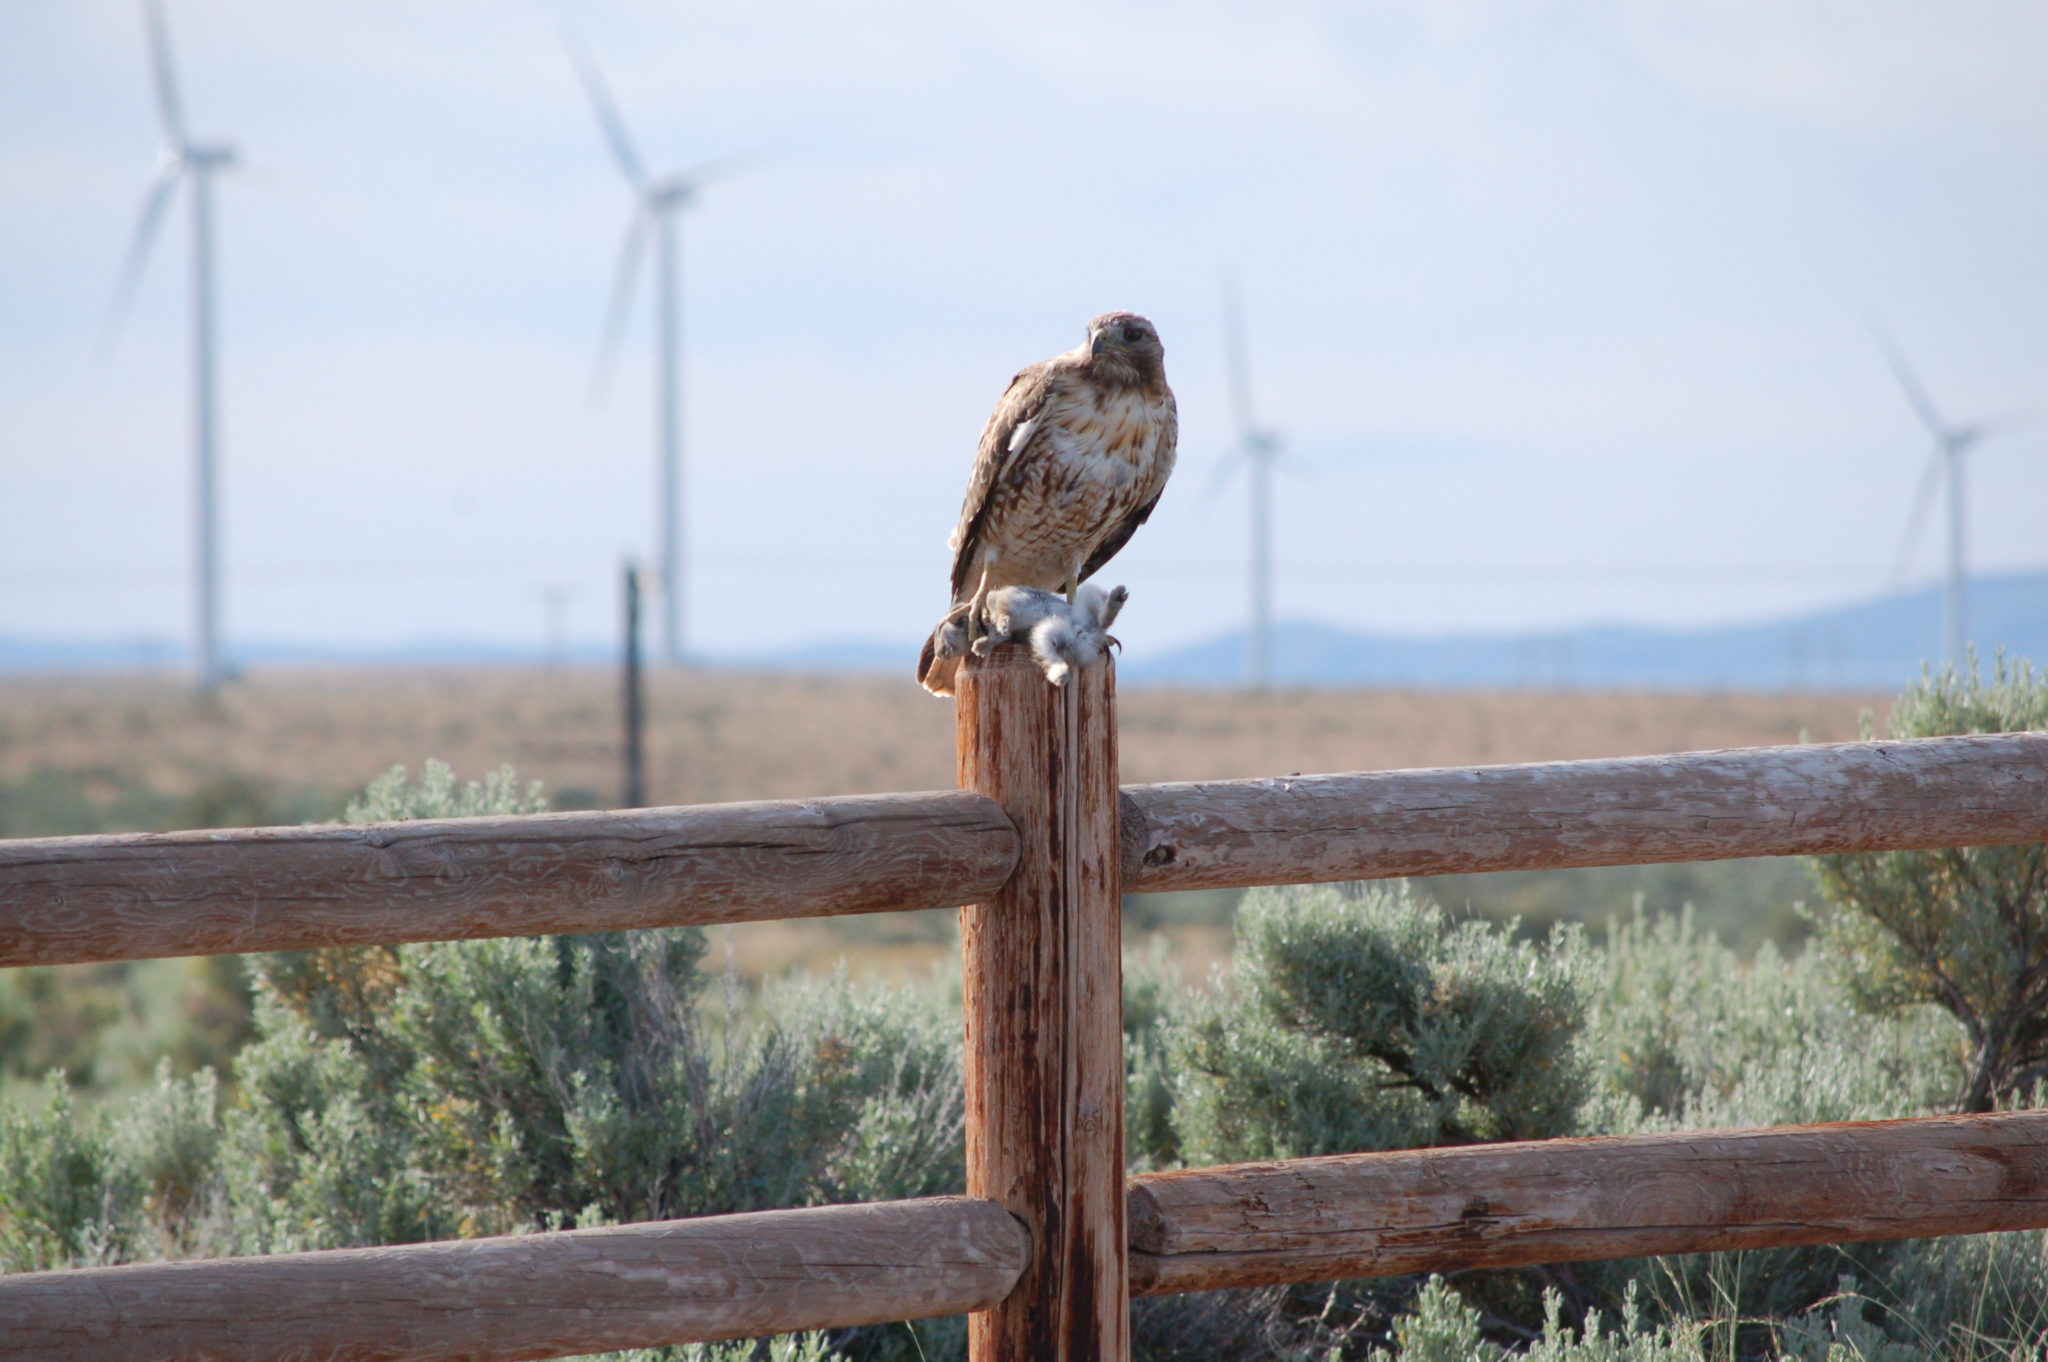 A red-tailed hawk hunts near turbines at the Wild Horse wind facility in central Washington State.